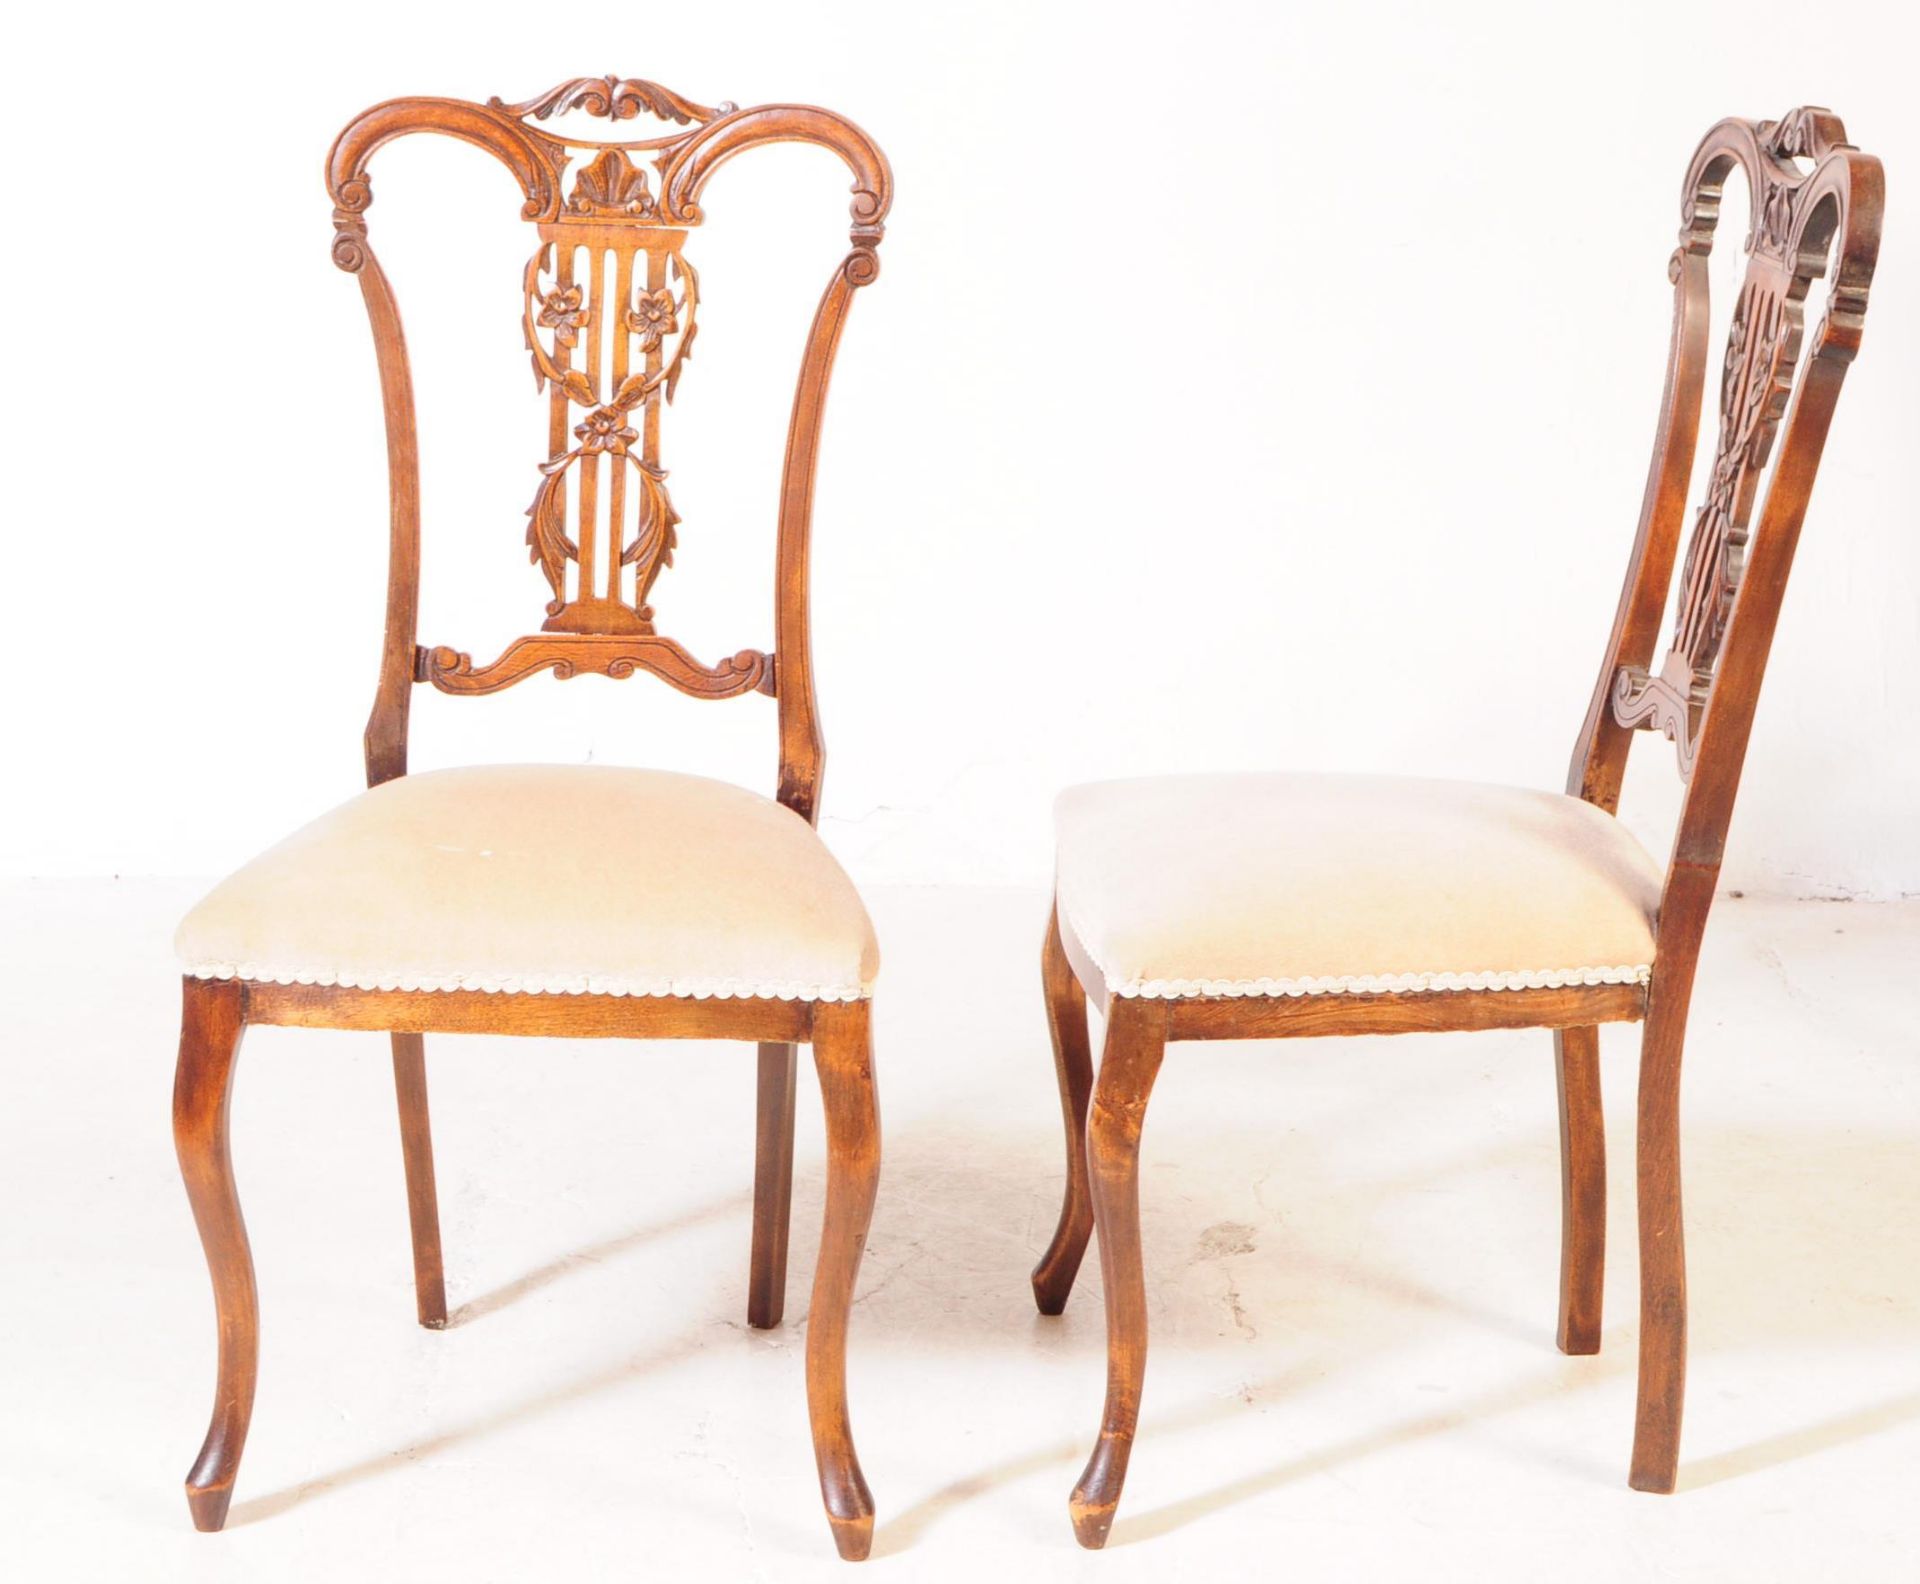 FOUR LATE 19TH CENTURY CHIPPENDALE STYLE DINING CHAIRS - Image 3 of 6